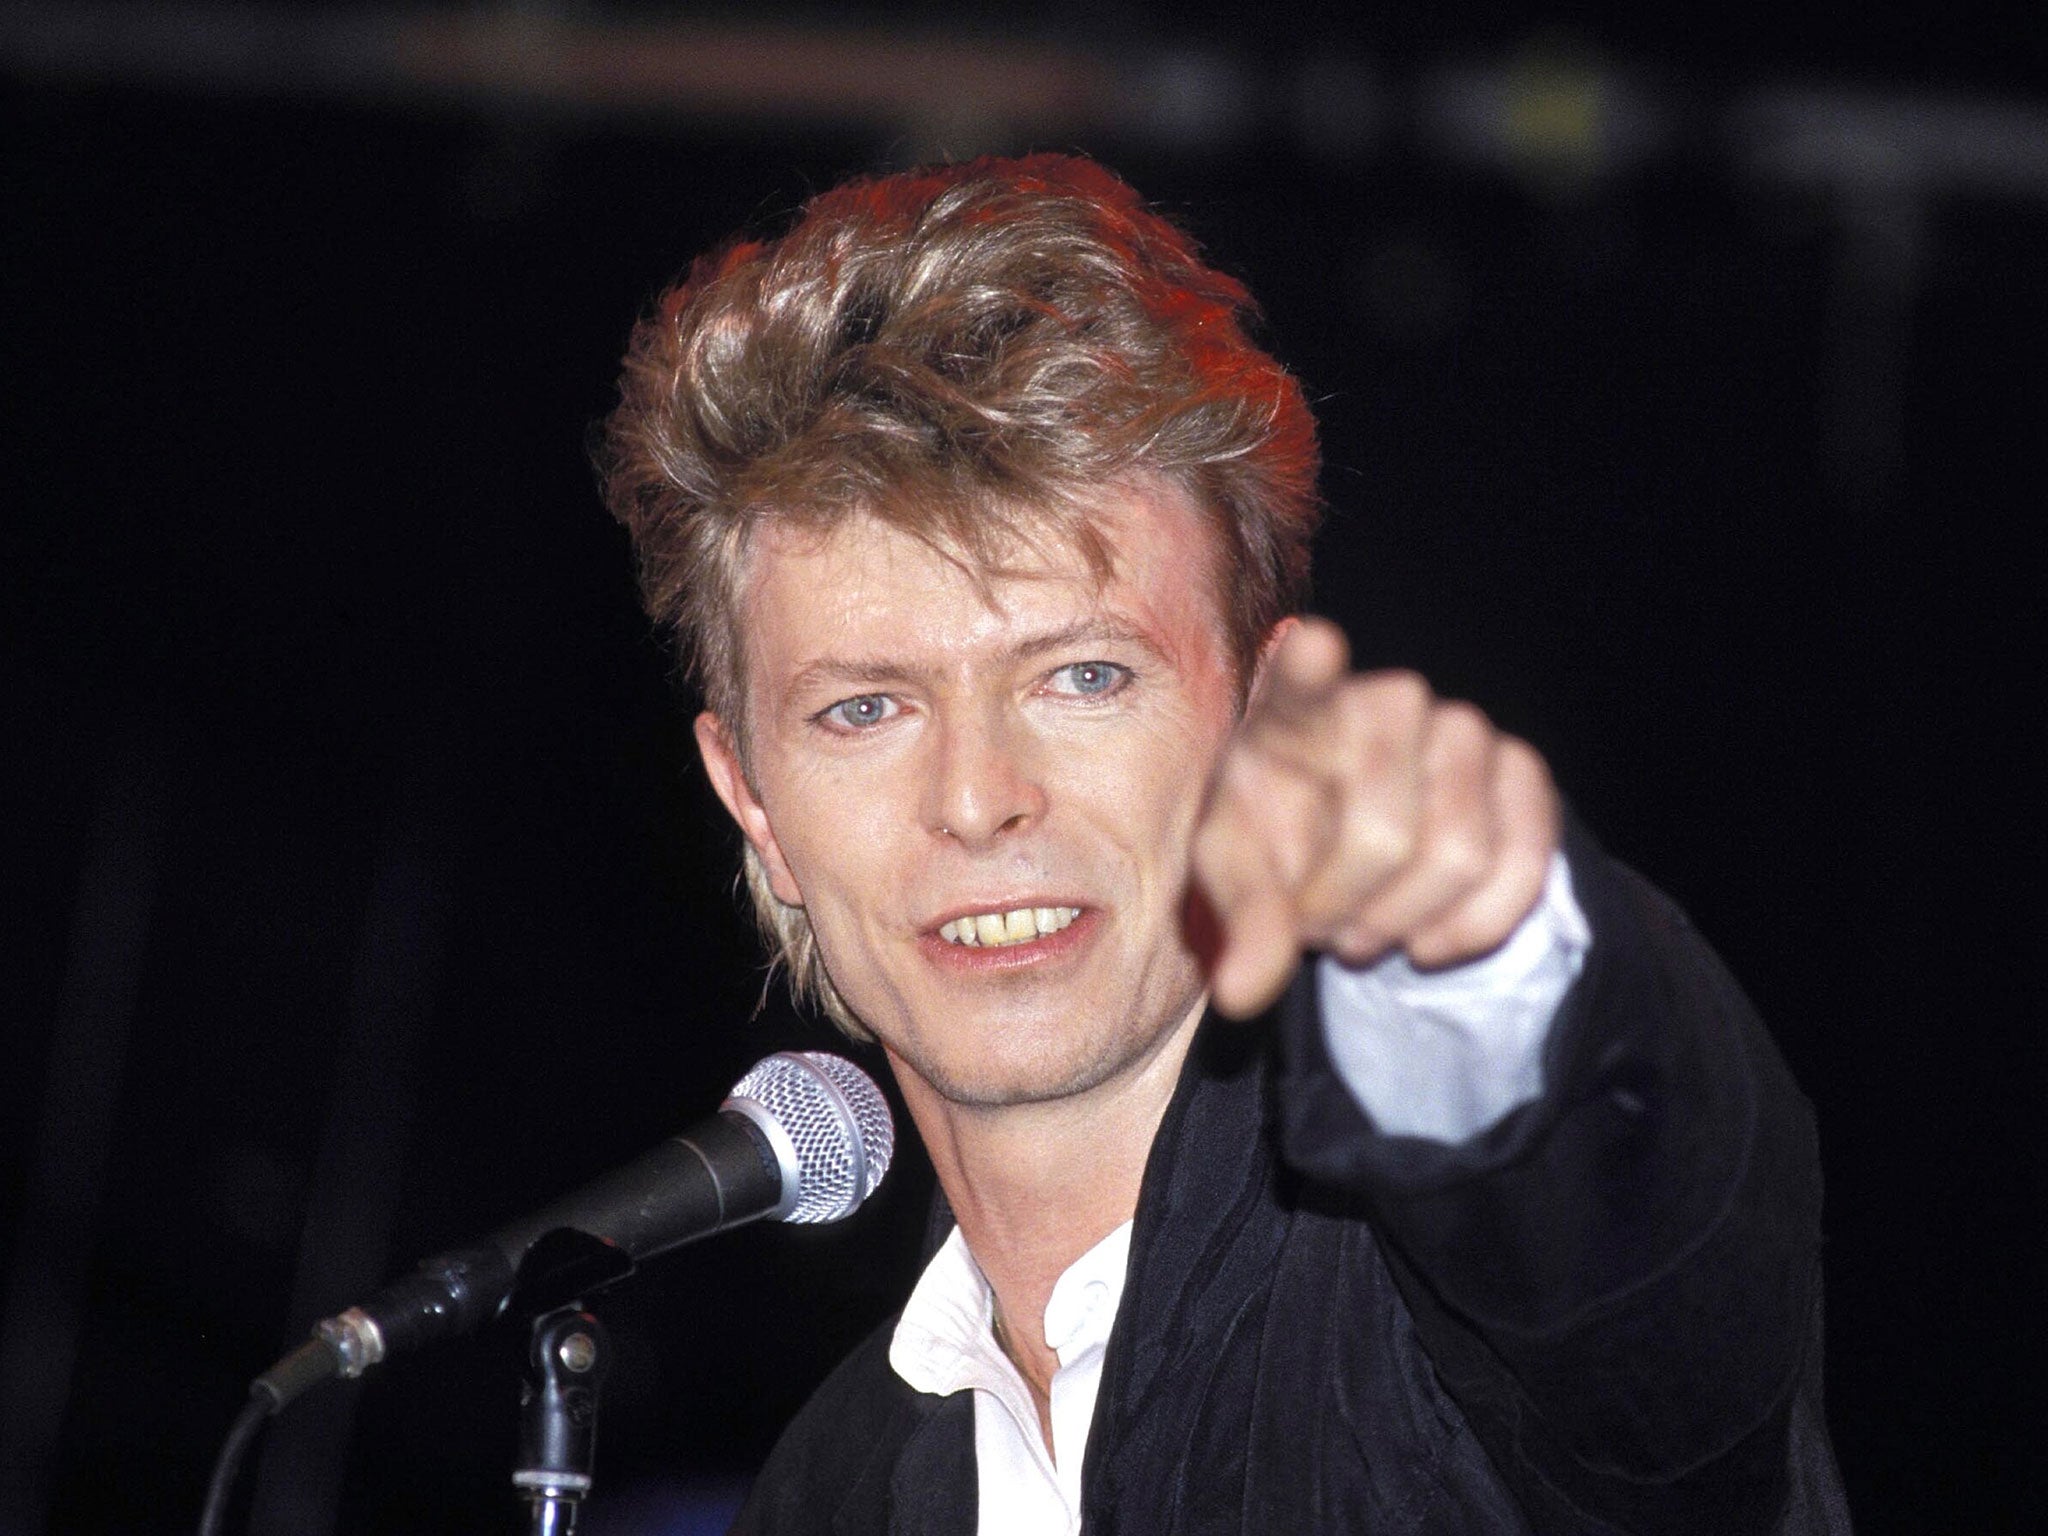 Bowie died of cancer at the age of 69